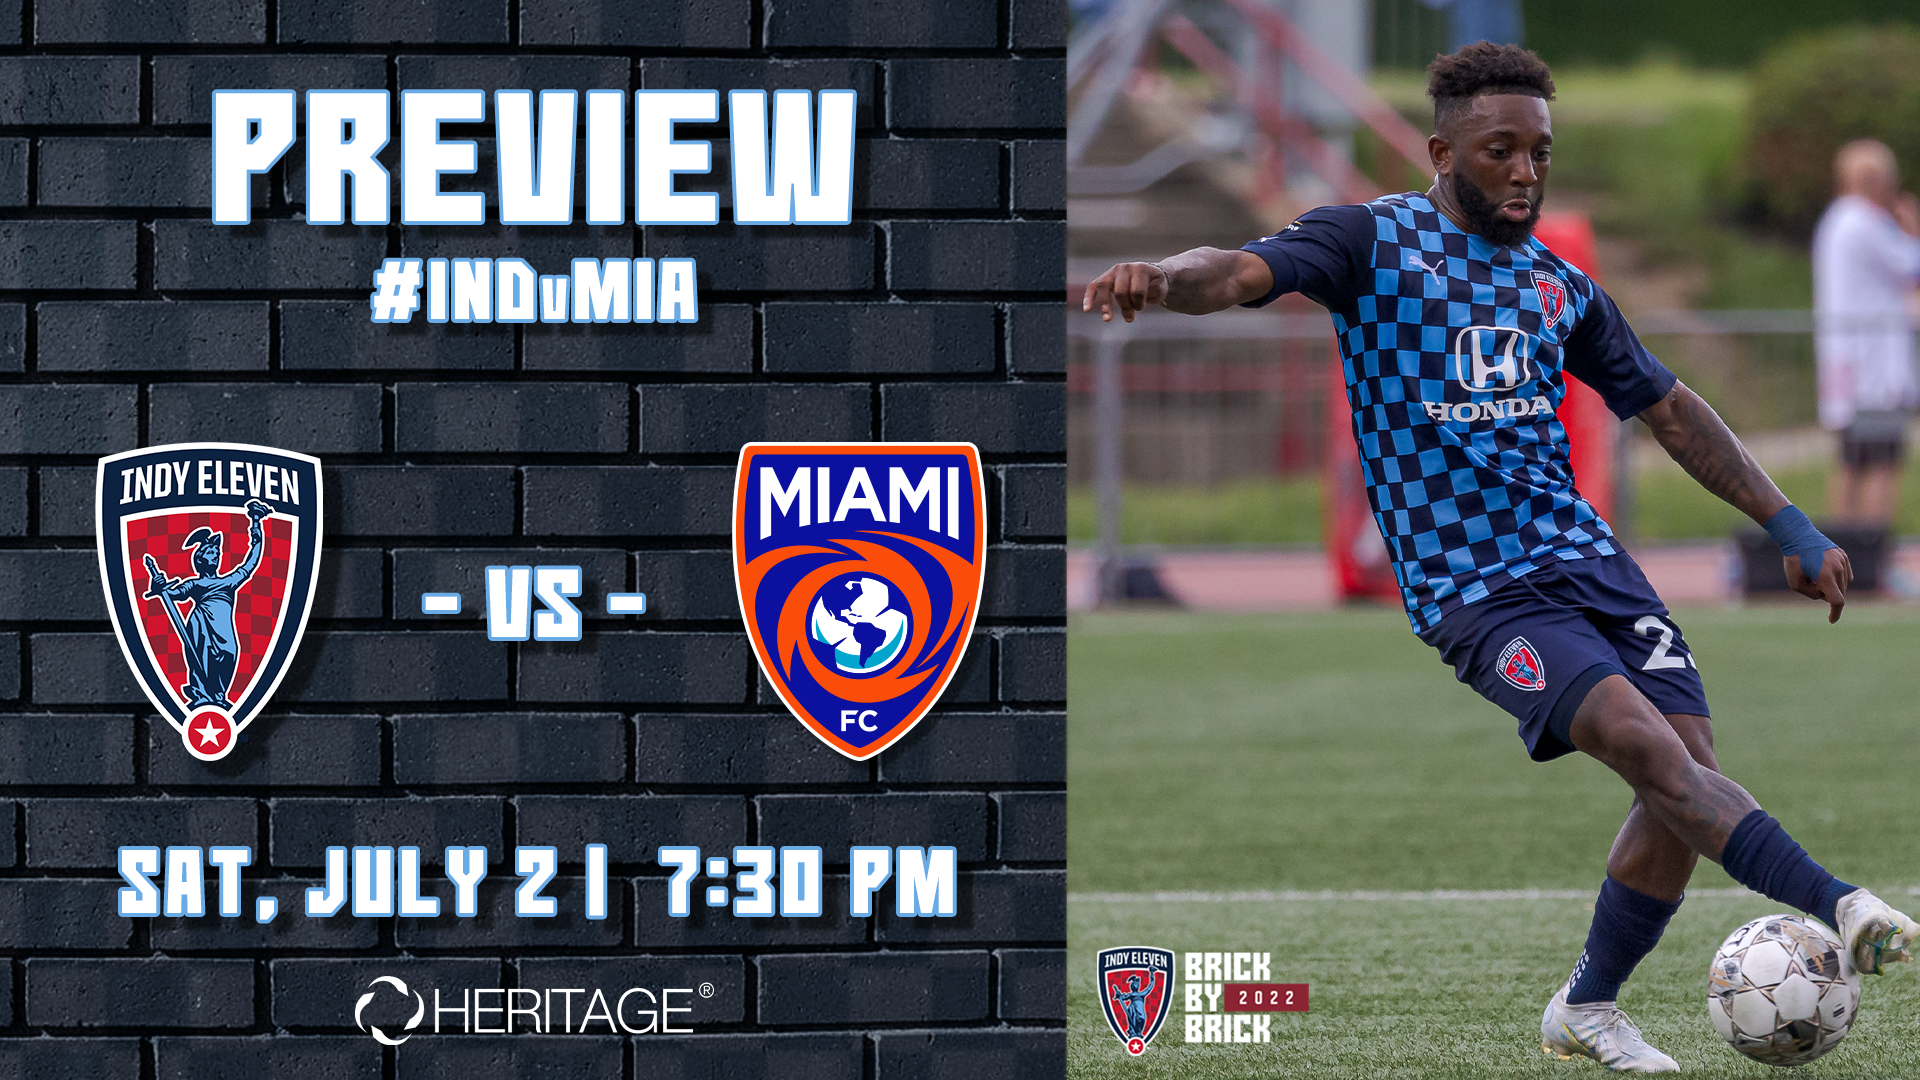 All to play for as Miami FC face El Paso Locomotive 